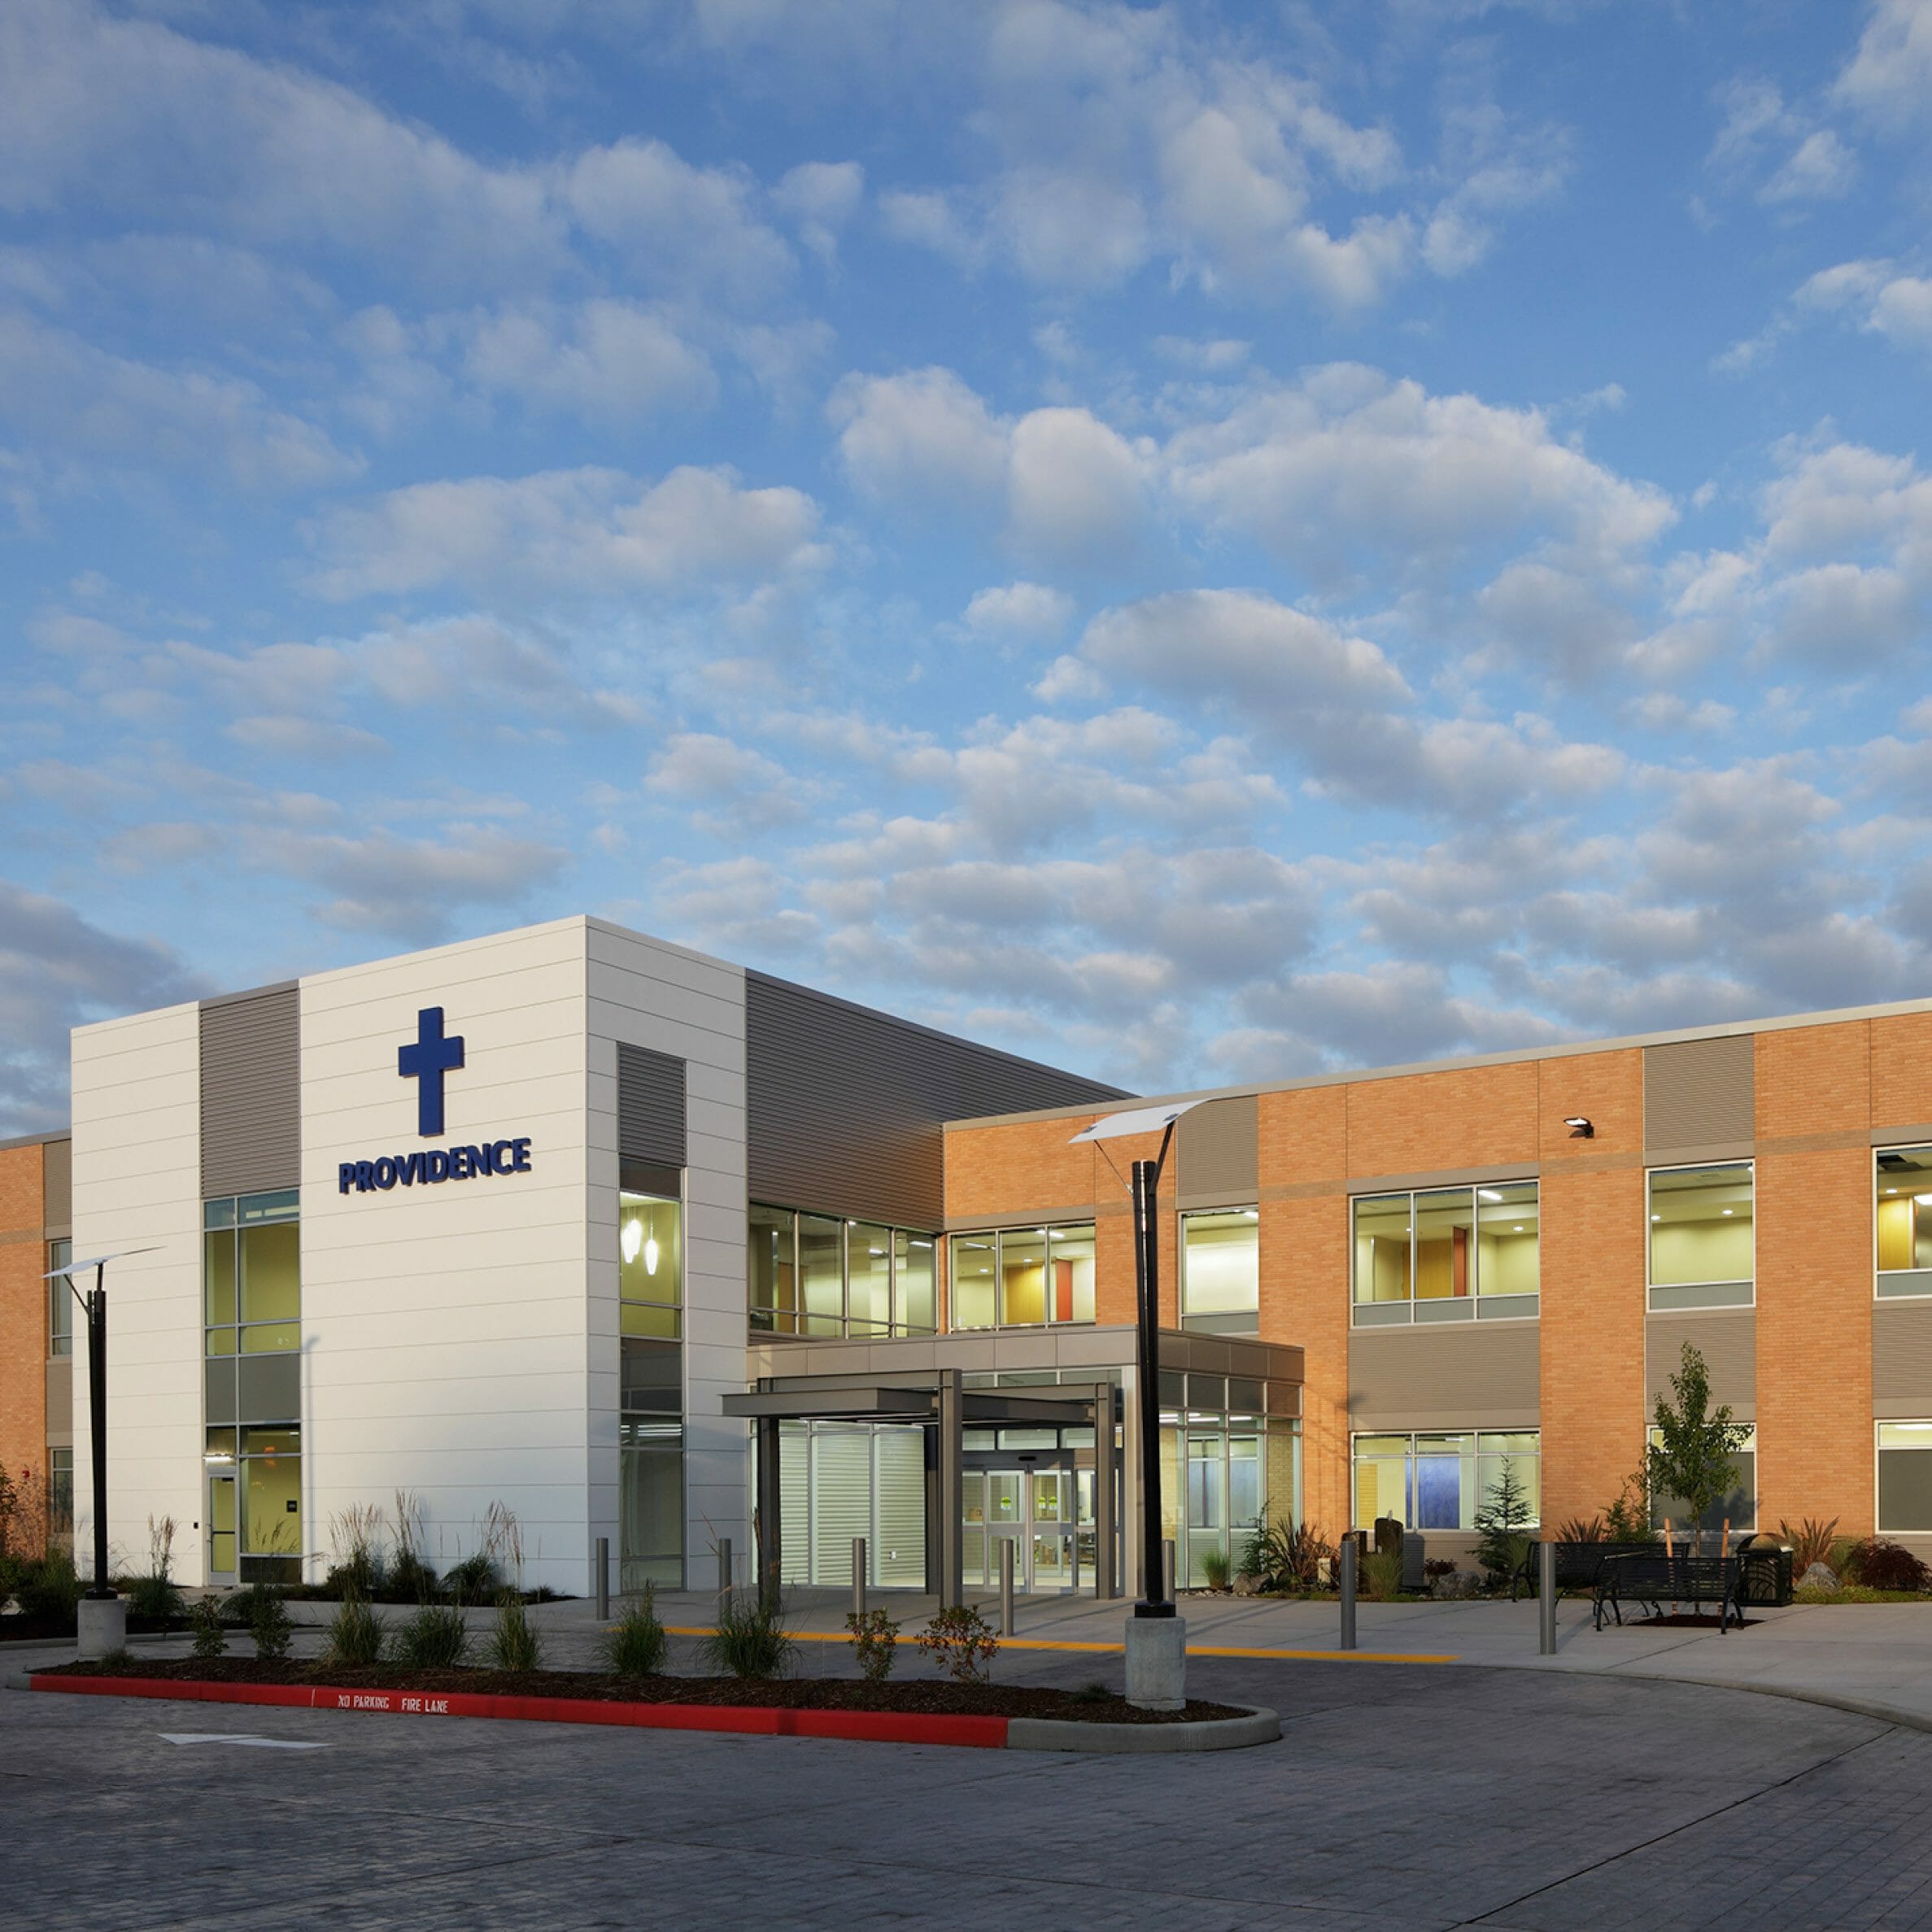 Exterior view of Providence Monroe Family Medicine with a brick exterior and silver and gray accent walls where the blue Providence letters and cross sign are